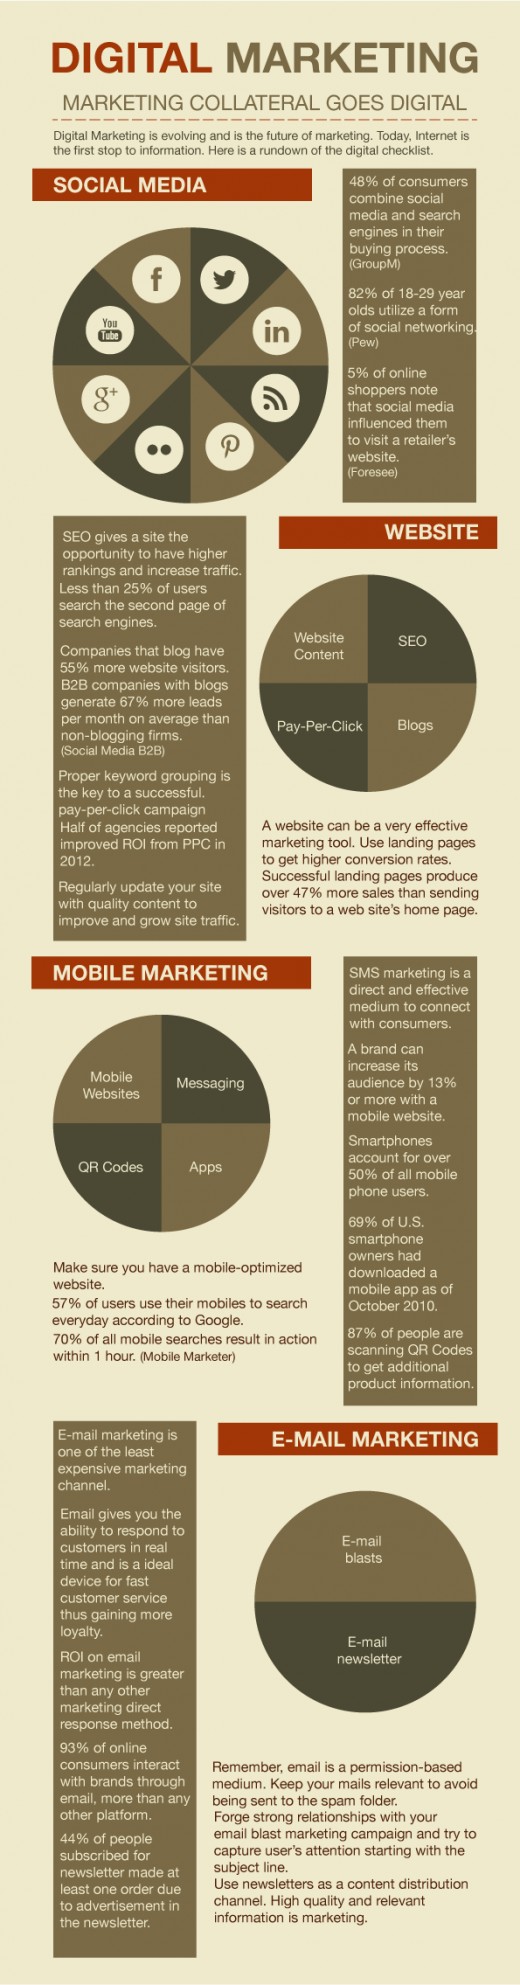 Infographic of digital marketing checklist with some facts and statistics to help you create an effective digital marketing campaign